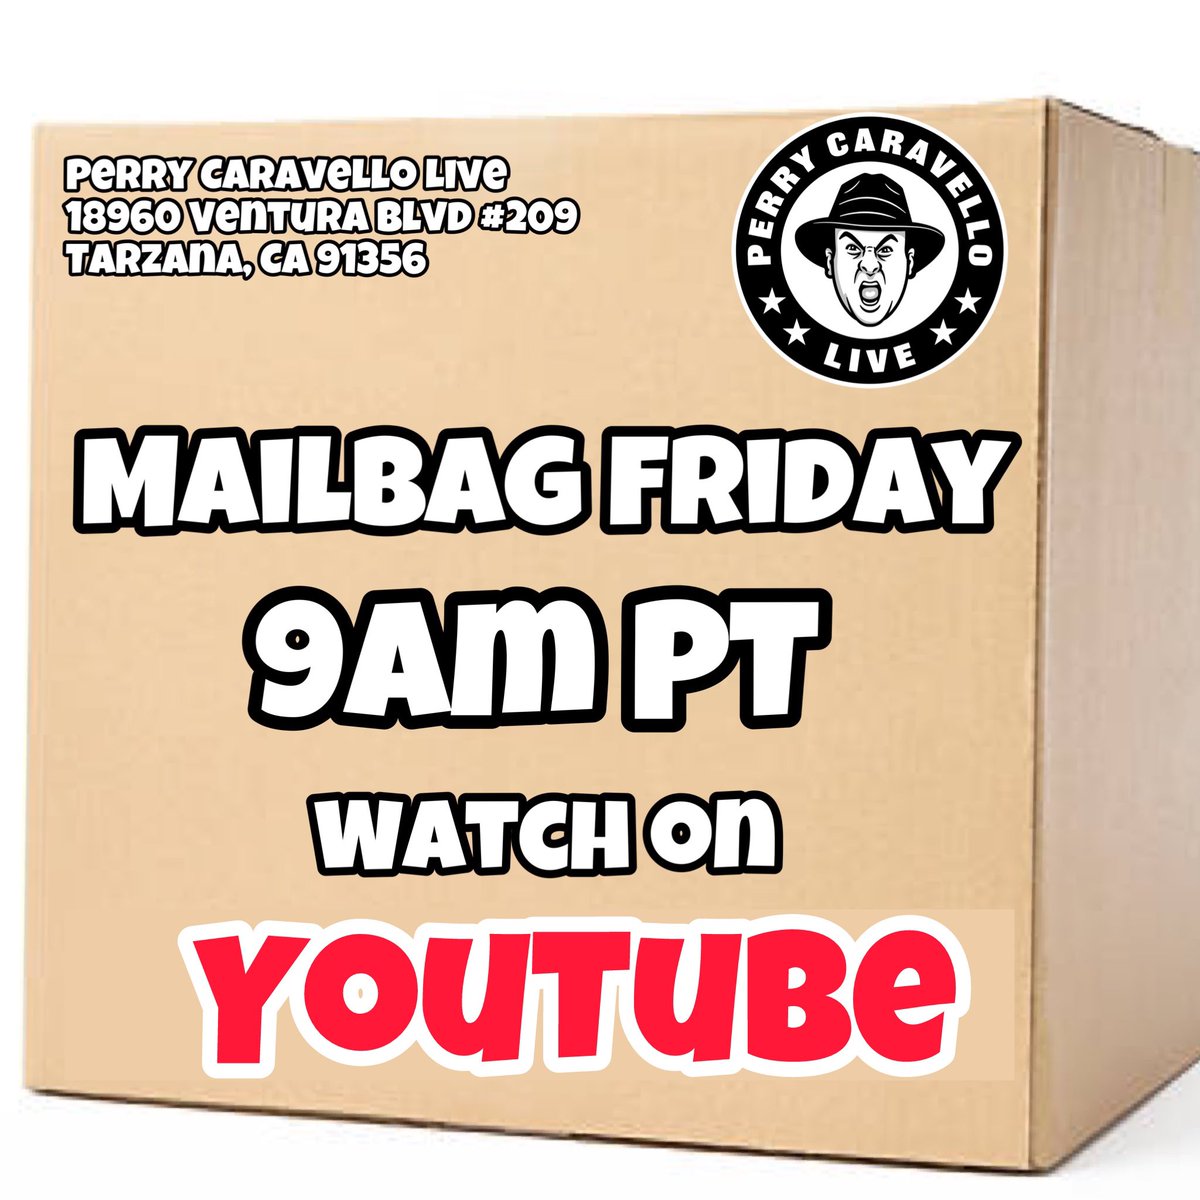 Mailbag Friday opens up at 9am PT only on YouTube